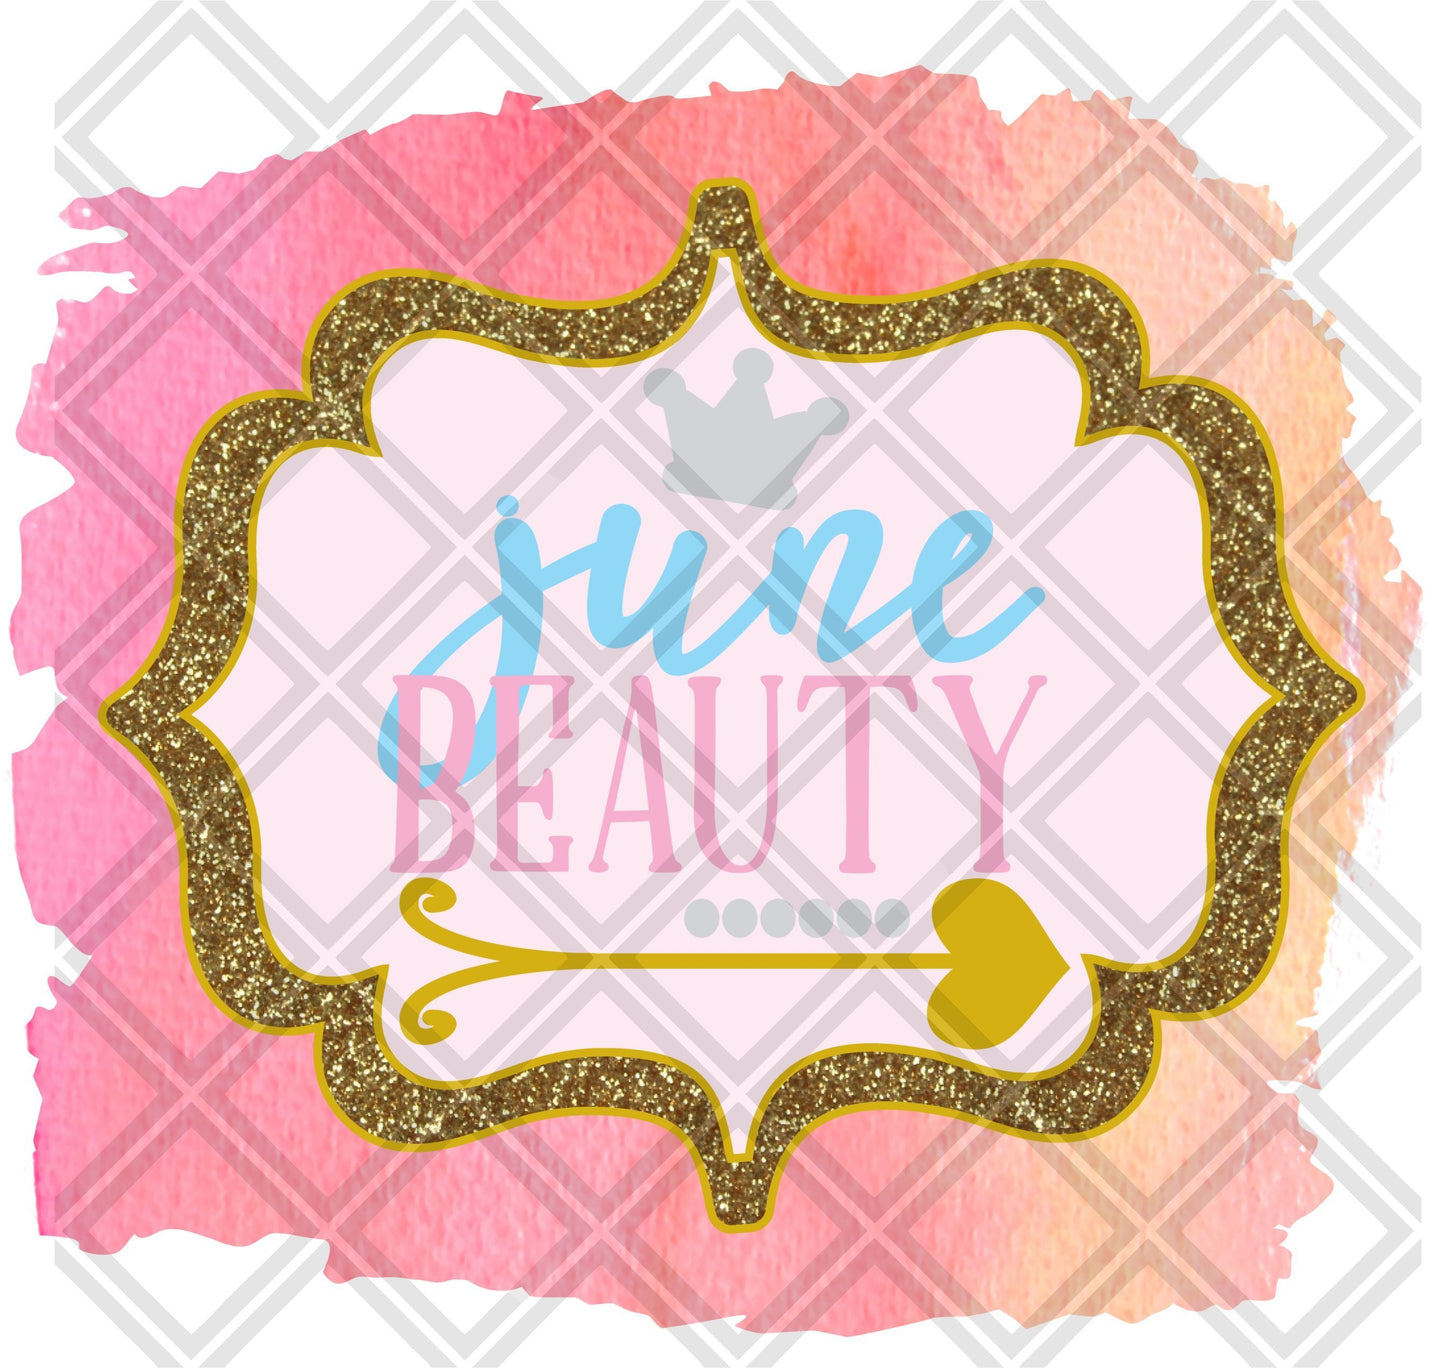 June Beauty Month DTF TRANSFERPRINT TO ORDER